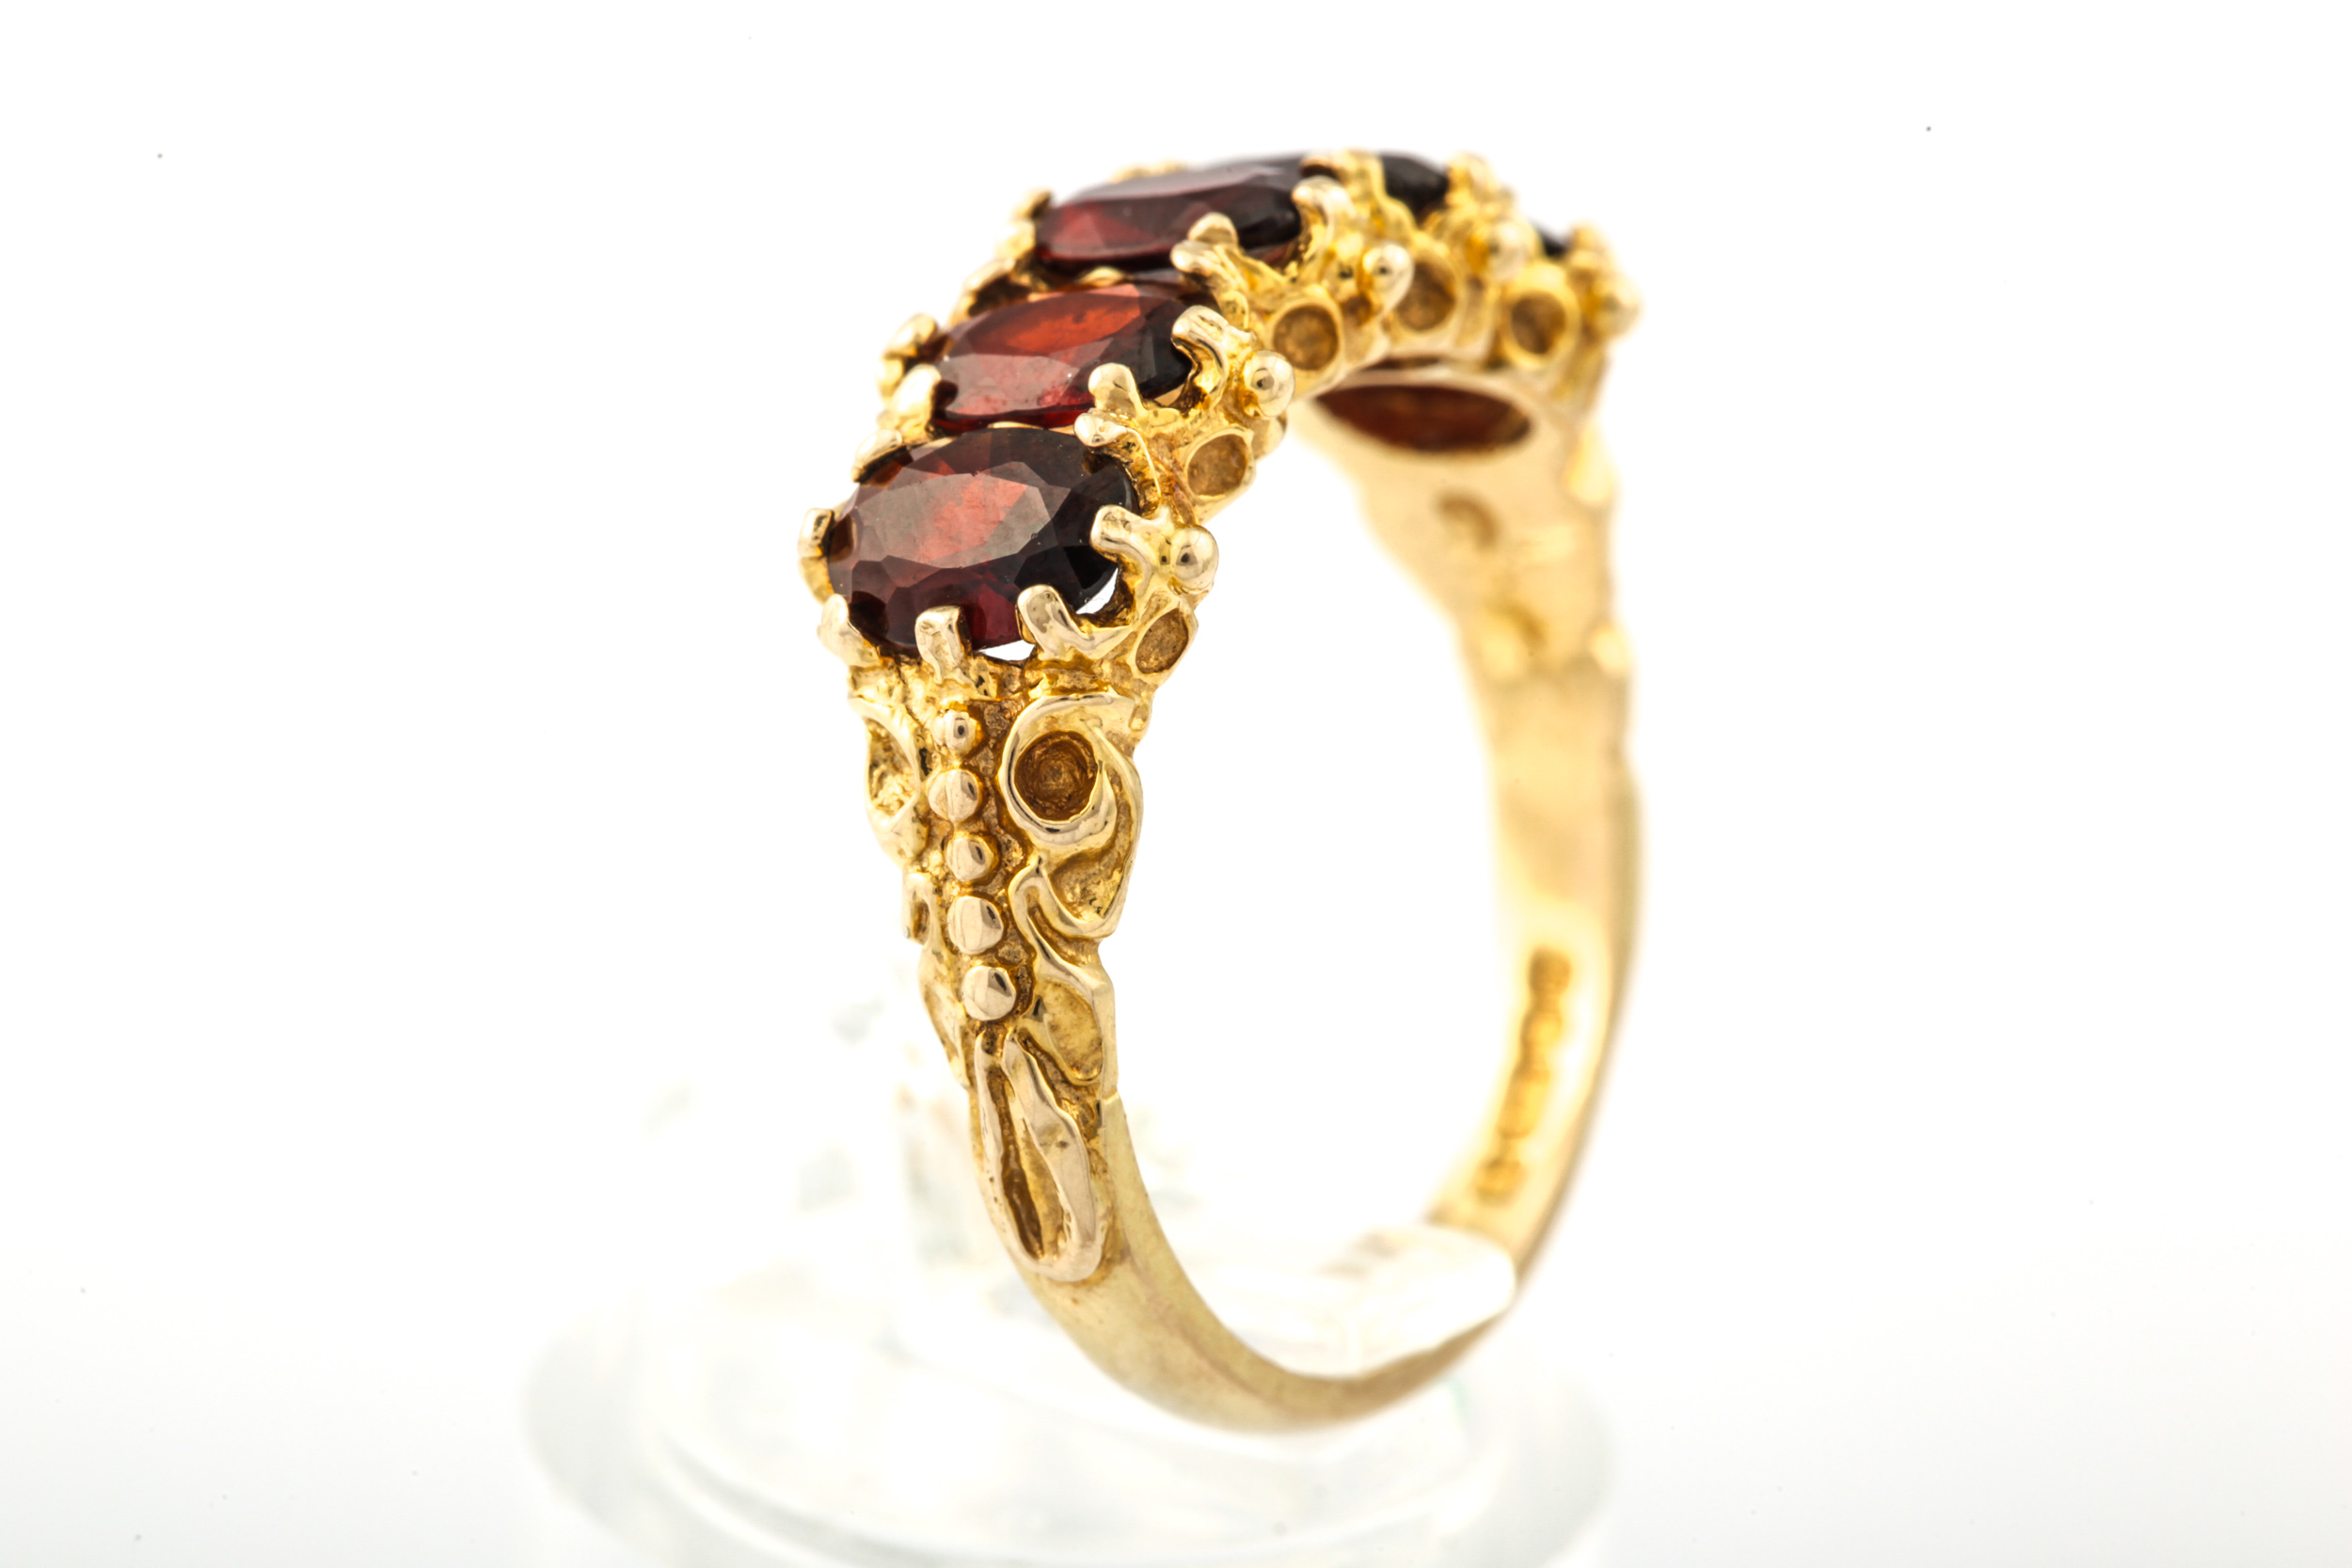 A vintage 9ct gold and garnet five stone ring. - Image 3 of 6